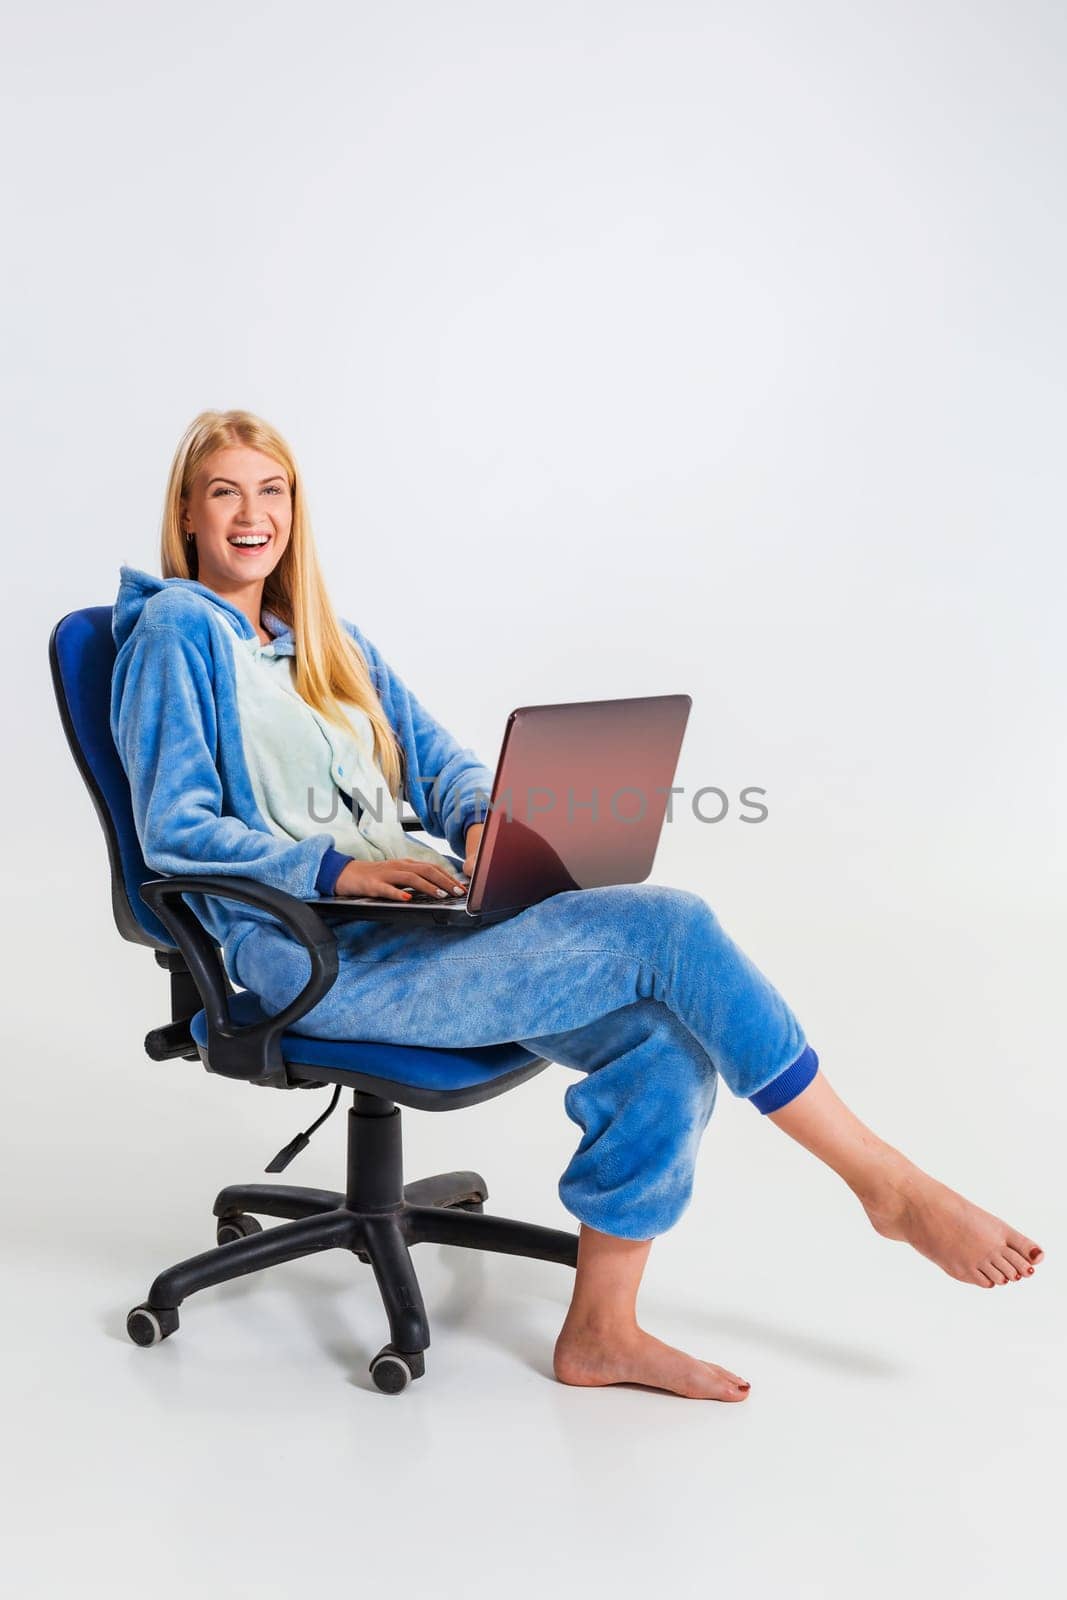 girl in pajamas with a laptop. studying or doing online shopping. work from home. girl smiling and happy